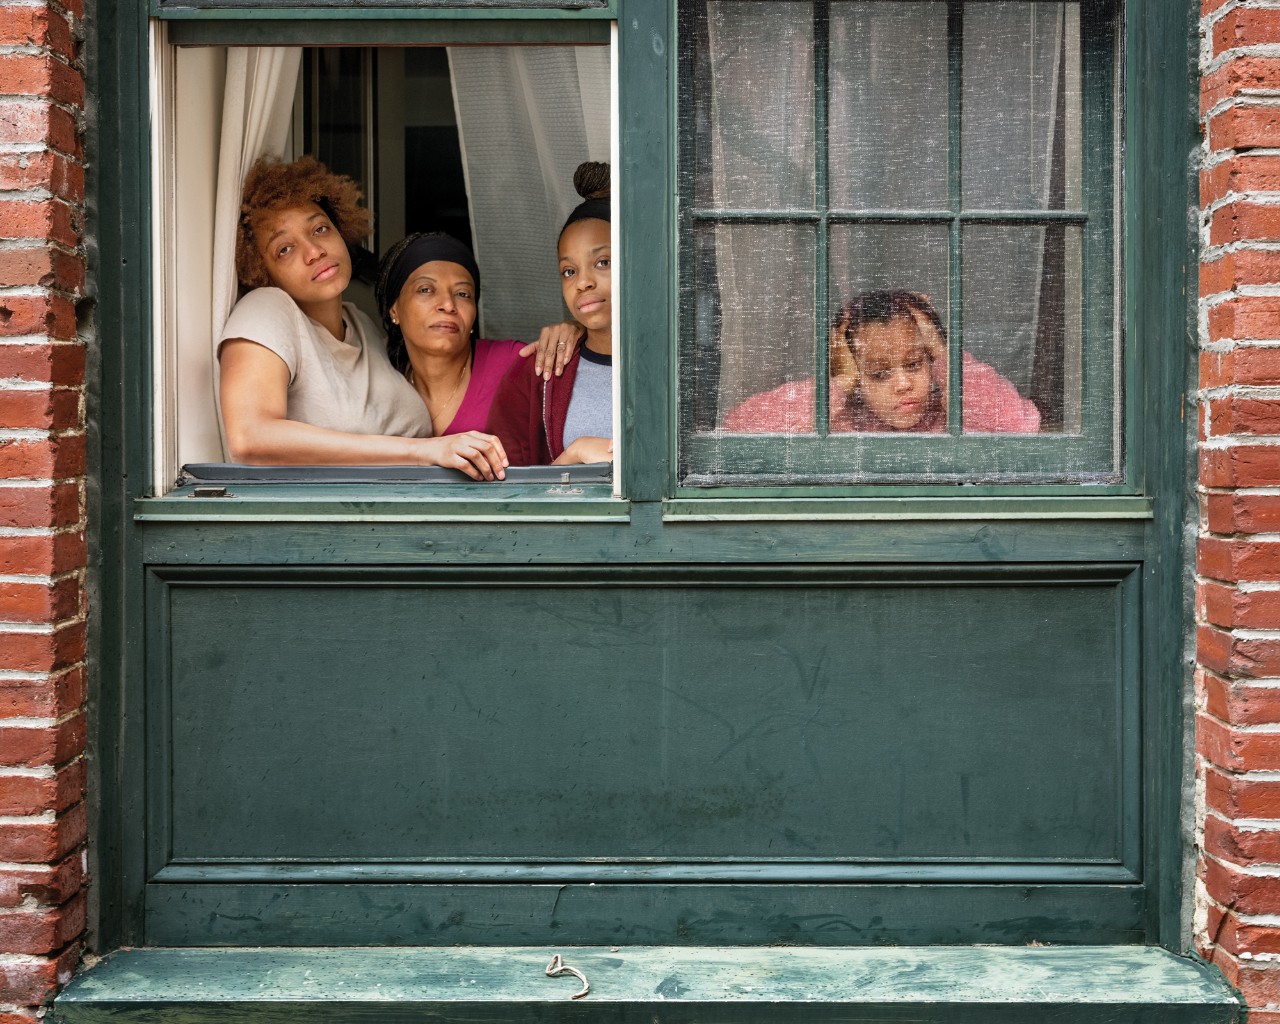 Figure 1. “Minty, Kayla, Leyah, Layla, Cambridge Massachusetts, 2020.” Family members, Minty, Kayla, Leyah, Layla, physically lean on each other as they look through their window.